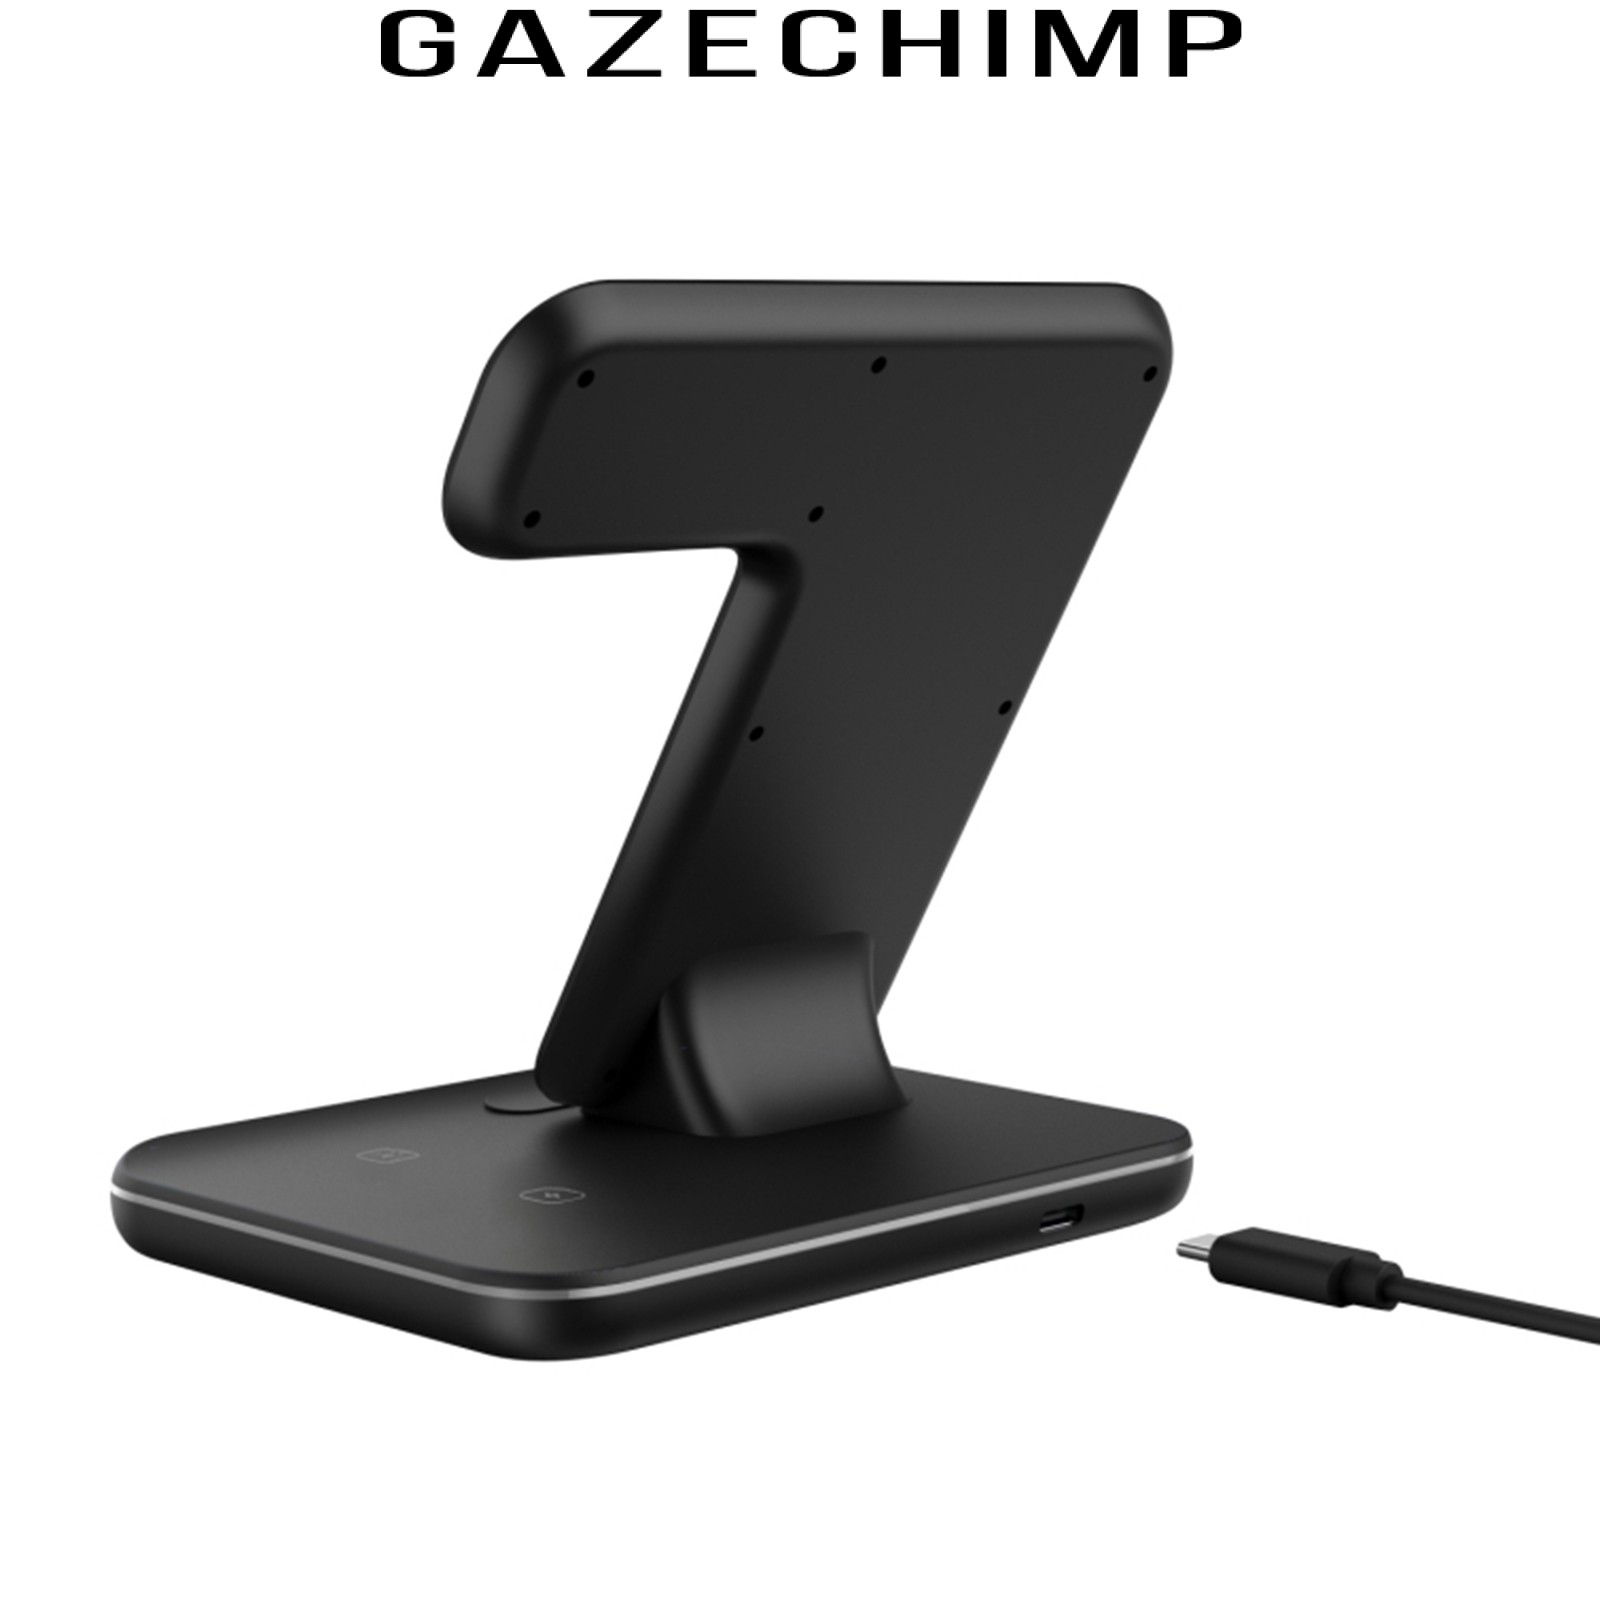 [GAZECHIMP] Wireless Charger 3 in 1 15W Qi Wireless Charging Station for iPhone SE/11 Pro/XS max/XR/X, Charging Pad for Airpods, for iWatch Series 6/SE/5/4/3/2